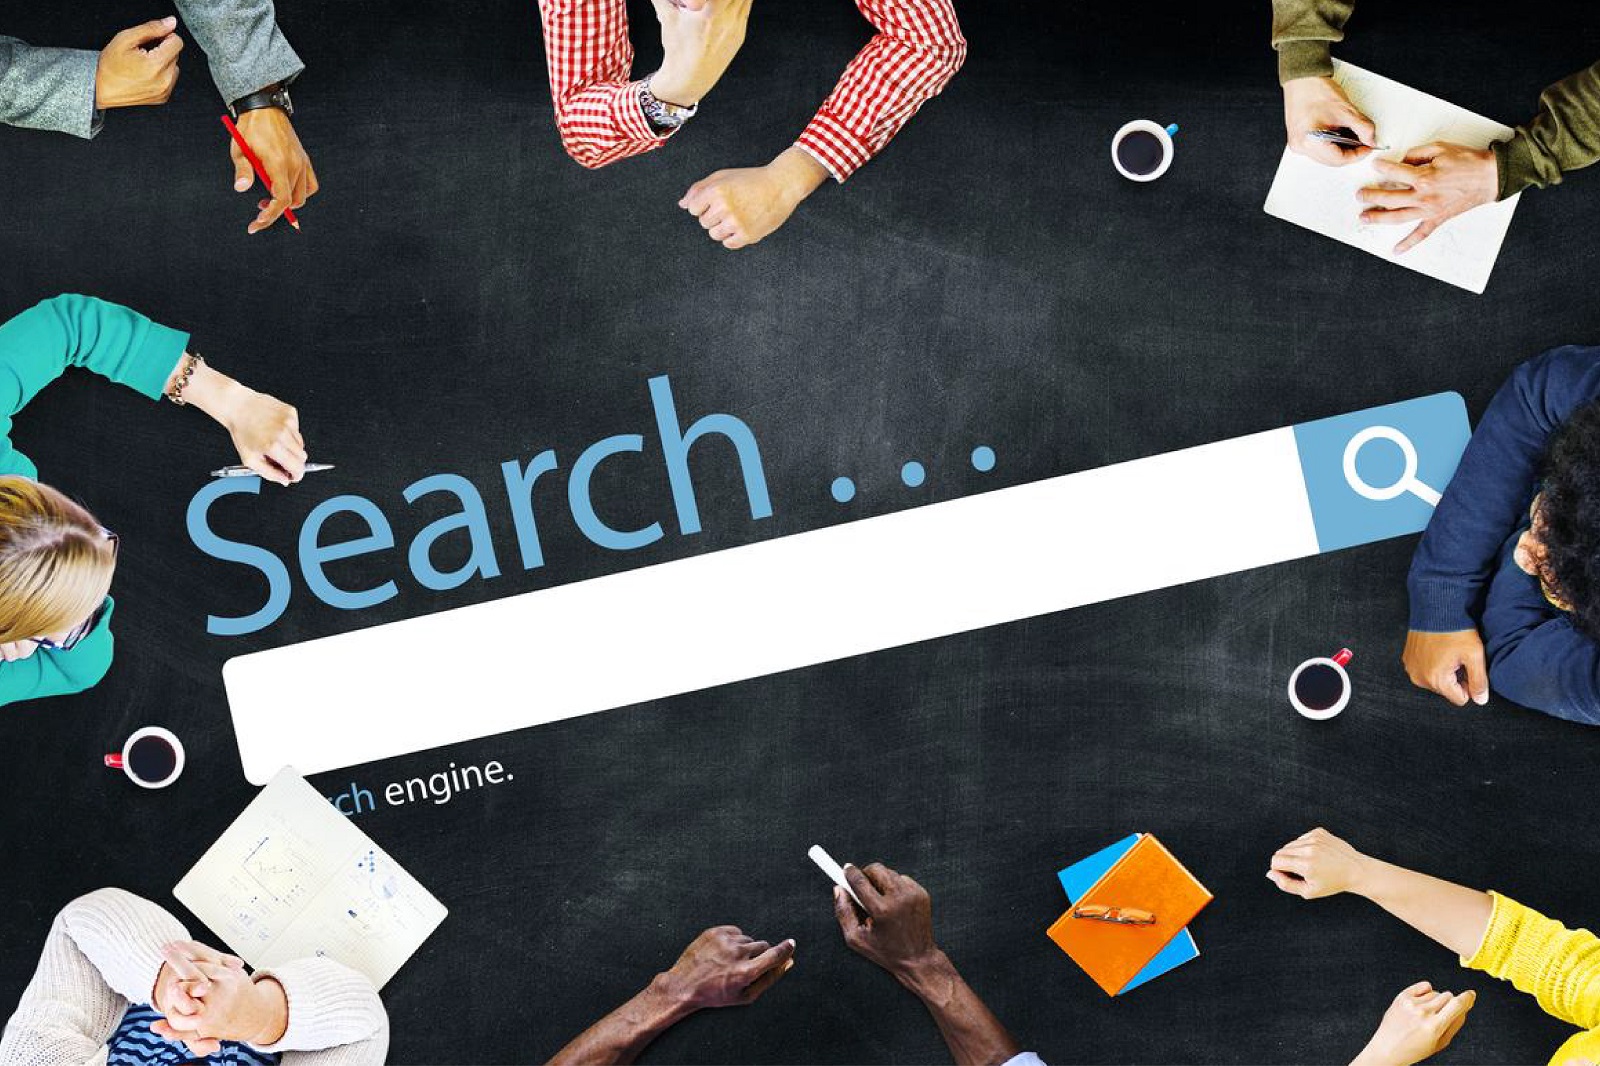 How does structured data help search engines